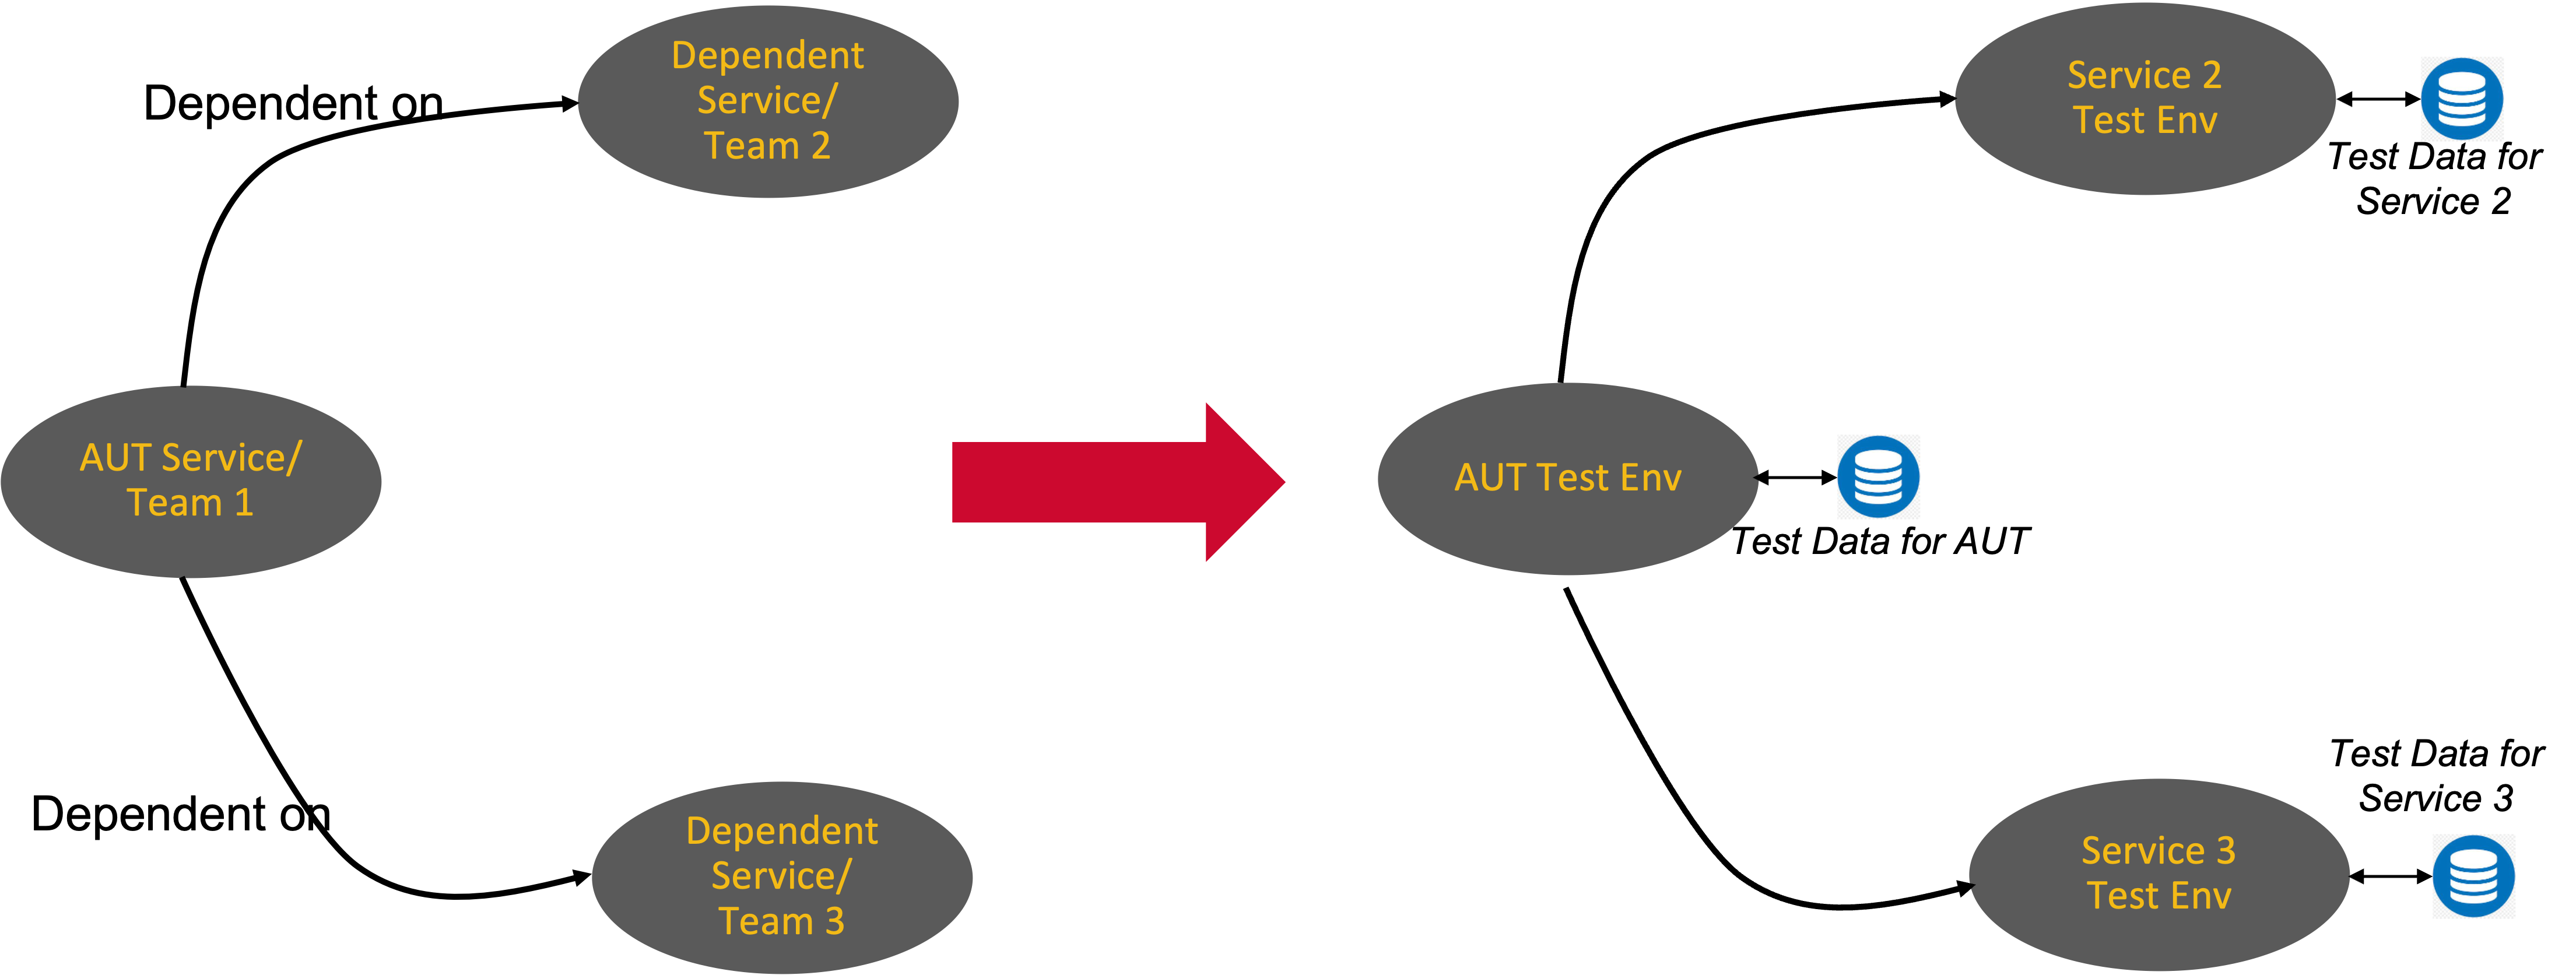 ESD_FY23_Academy-Blog.Better Together - Optimize Test Data Management for Distributed Applications with Service Virtualization.Figure 1